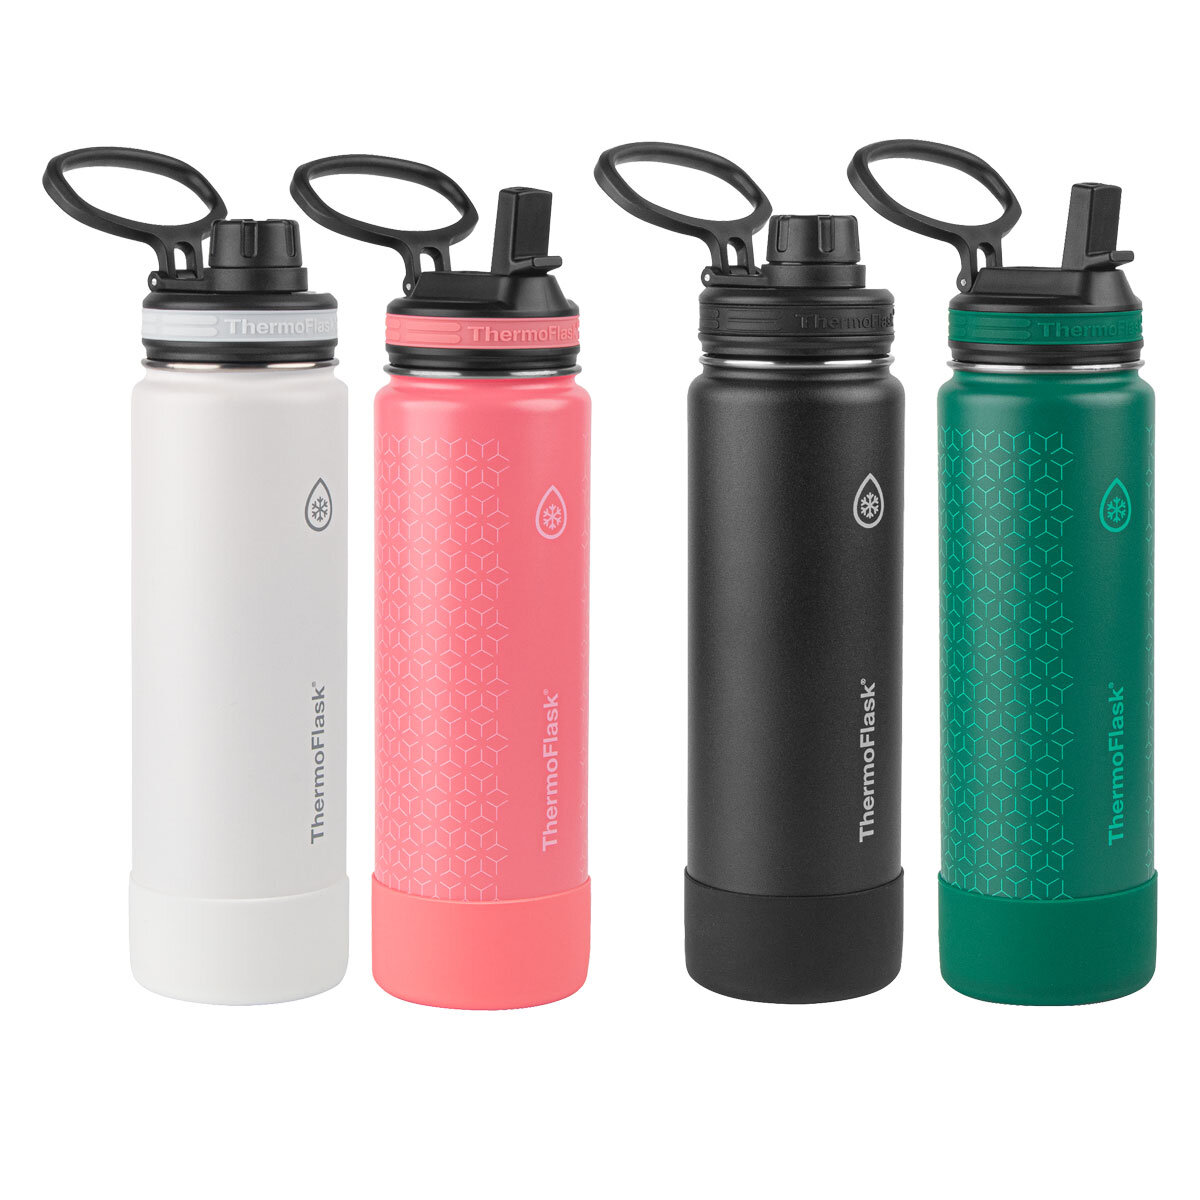 Thermoflask Stainless Steel Bottle 710ml, 2 Pack in 2 Colours